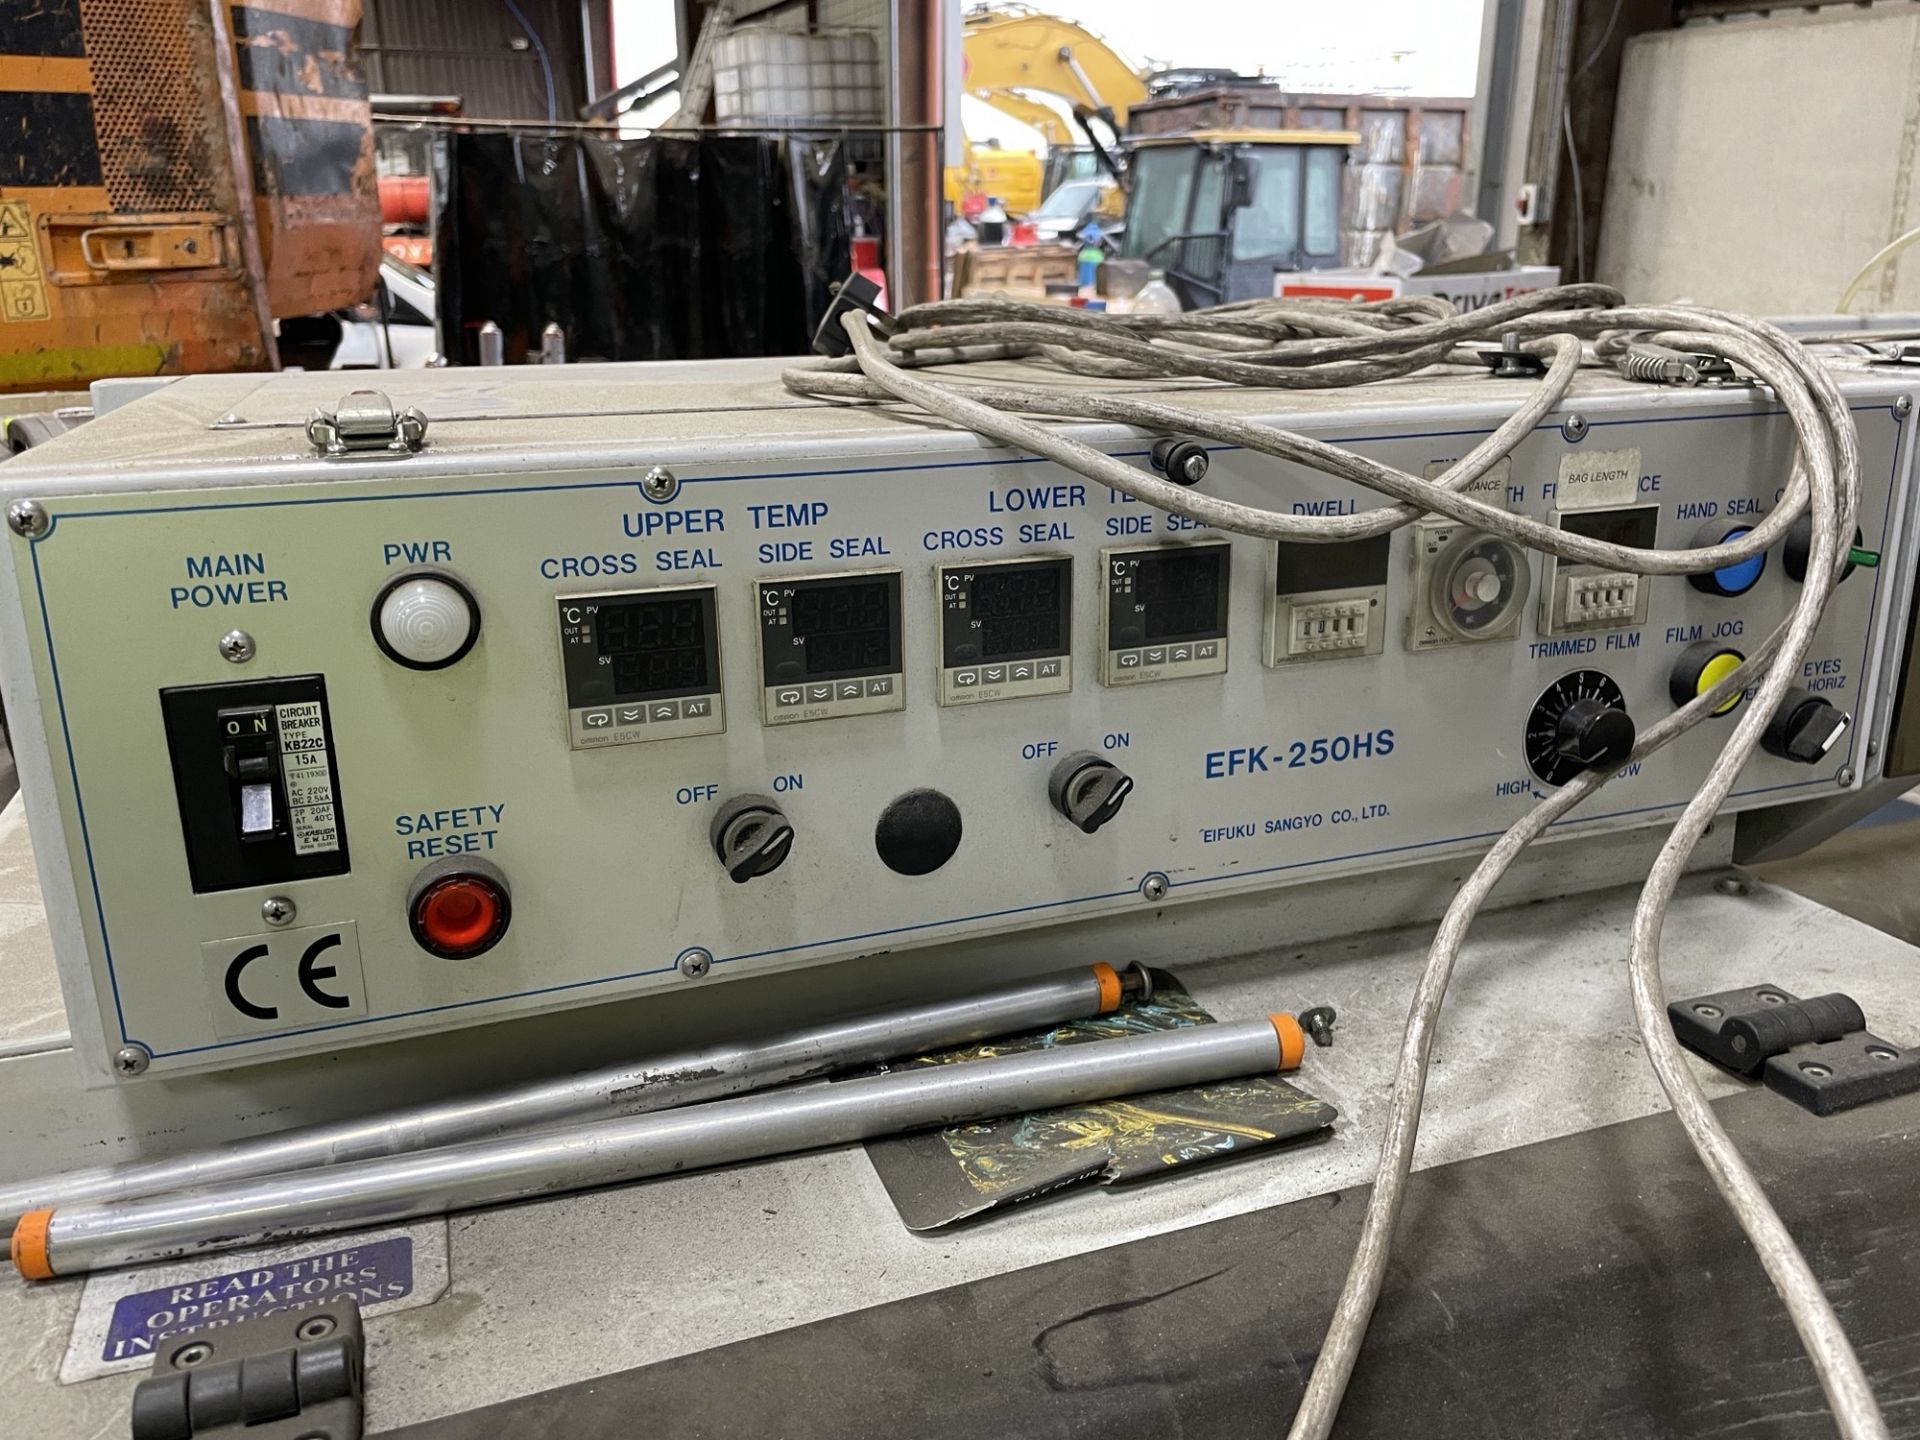 Adpak EFK 250 HS L Sealer, serial no. 4973, 13amp, 240V, loading free of charge - yes, lot located - Image 4 of 9